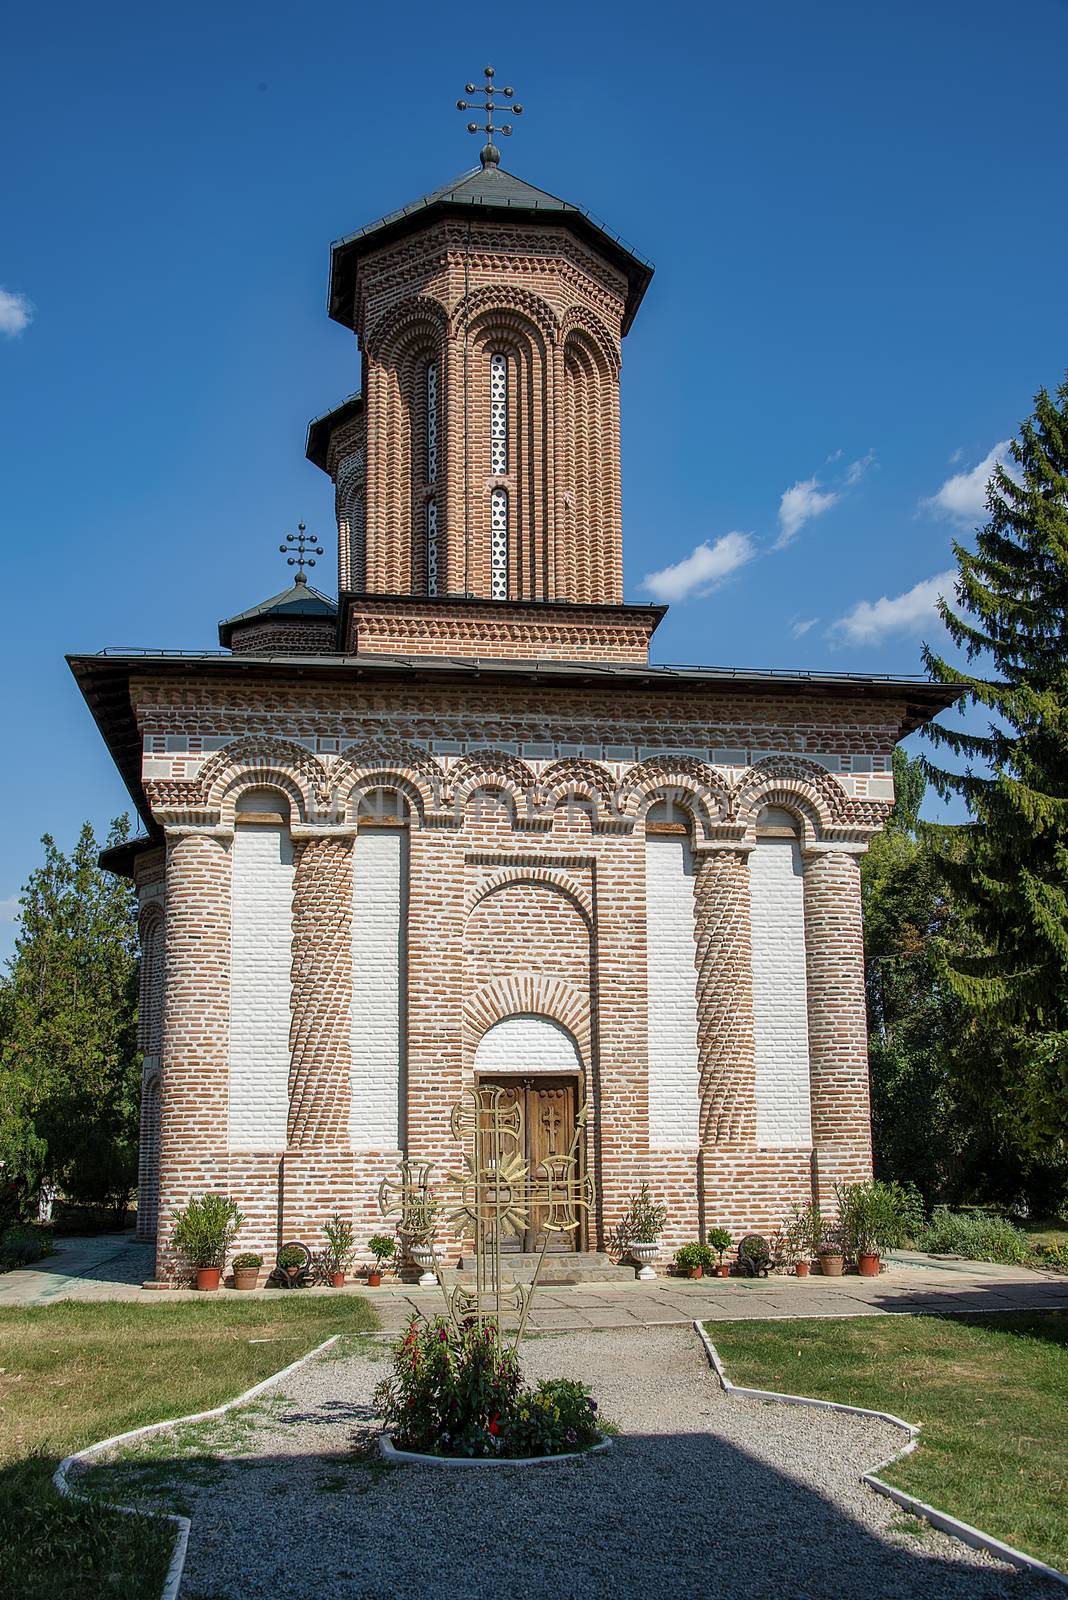 Snagov, Romania - Aug 2019: Snagov Monastary, the supposed resting place of Vlad the Impaler